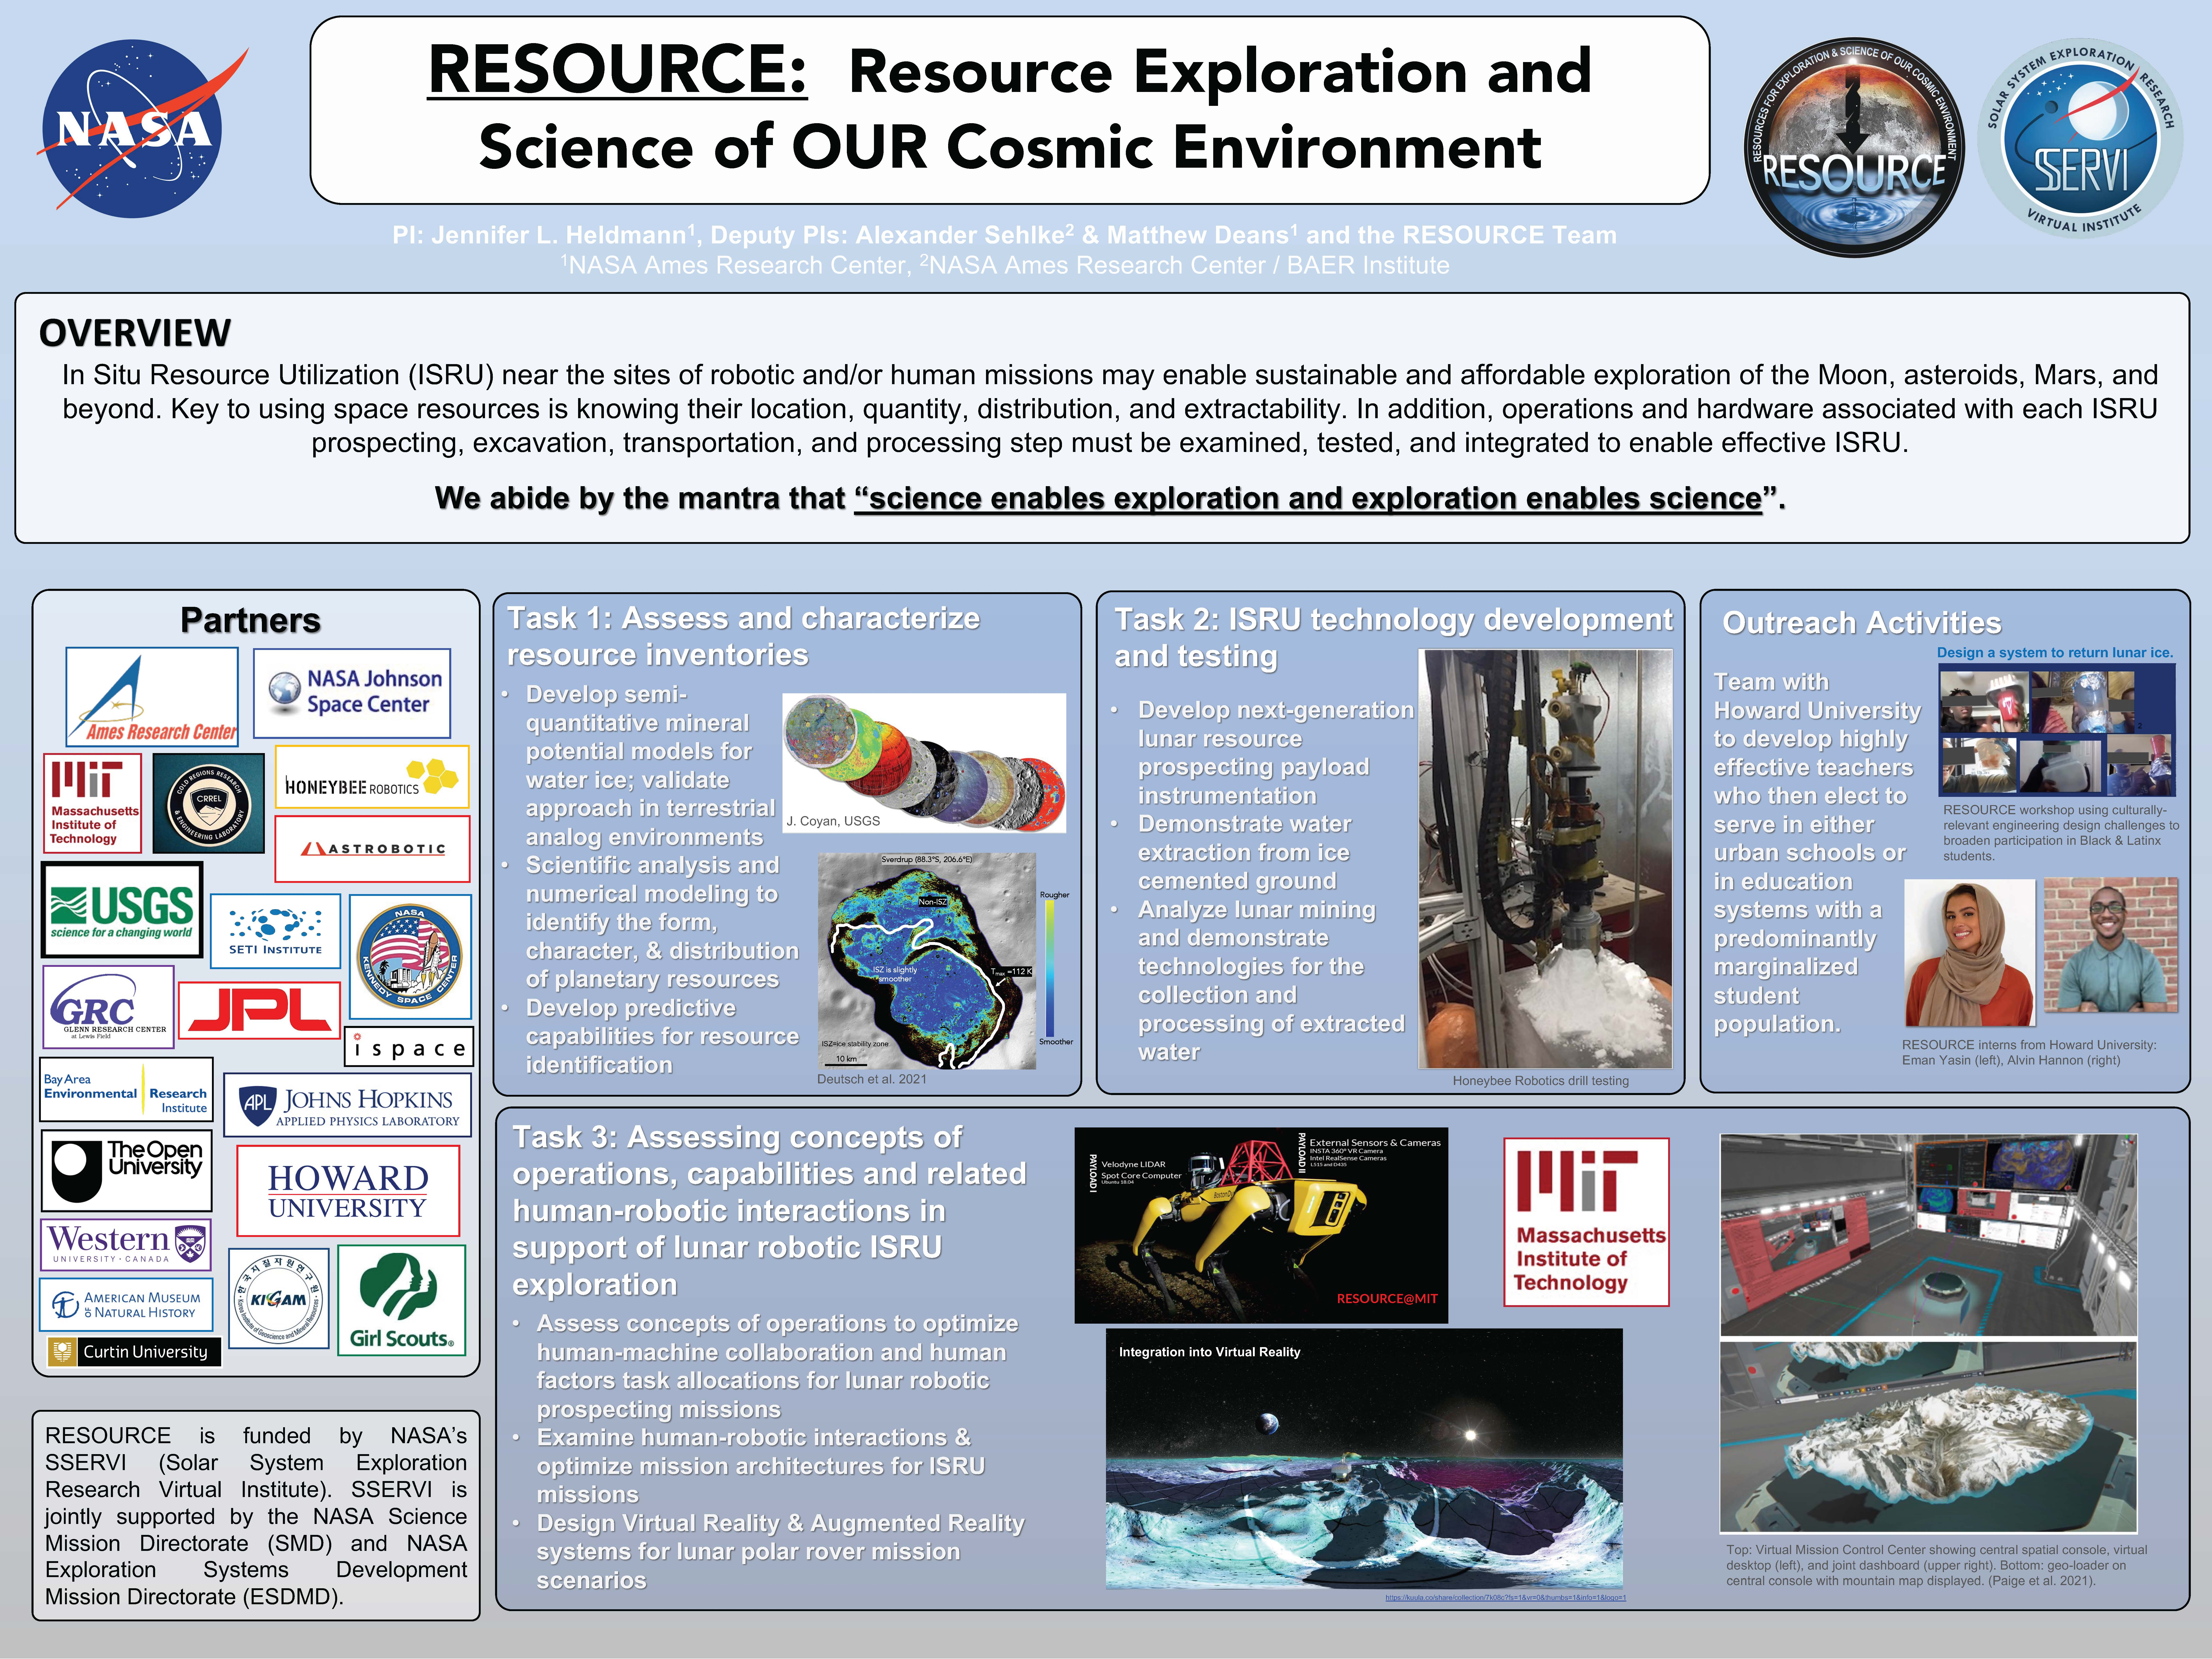 Overview of NASA’s RESOURCE (Resource Exploration and Science of OUR Cosmic Environment) Project